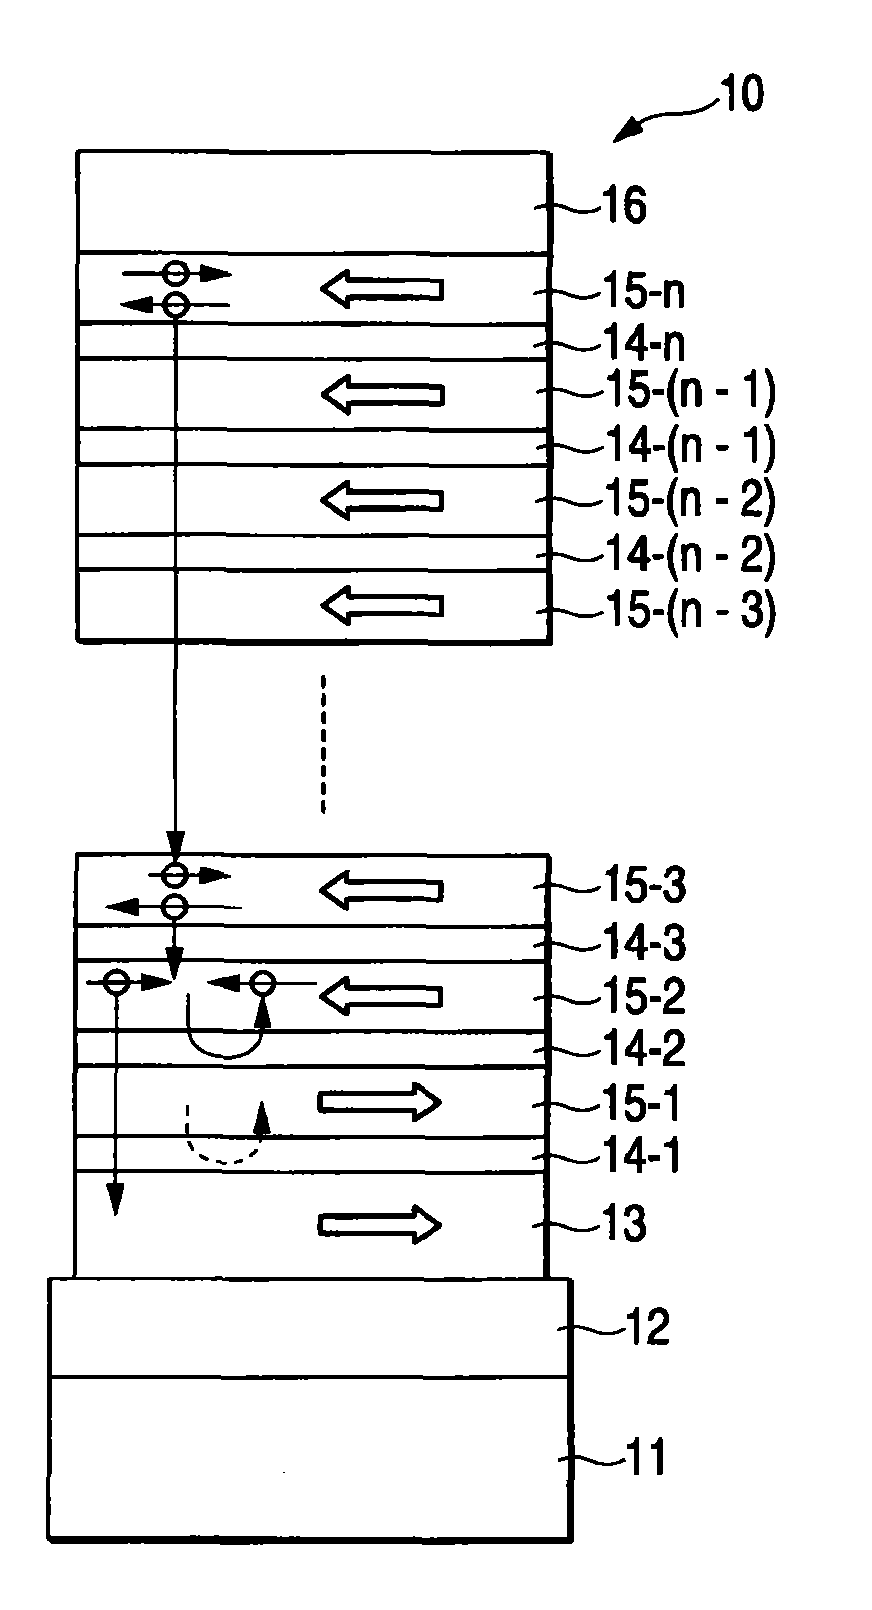 Multi-valued data recording spin injection maganetization reversal element and device using the element